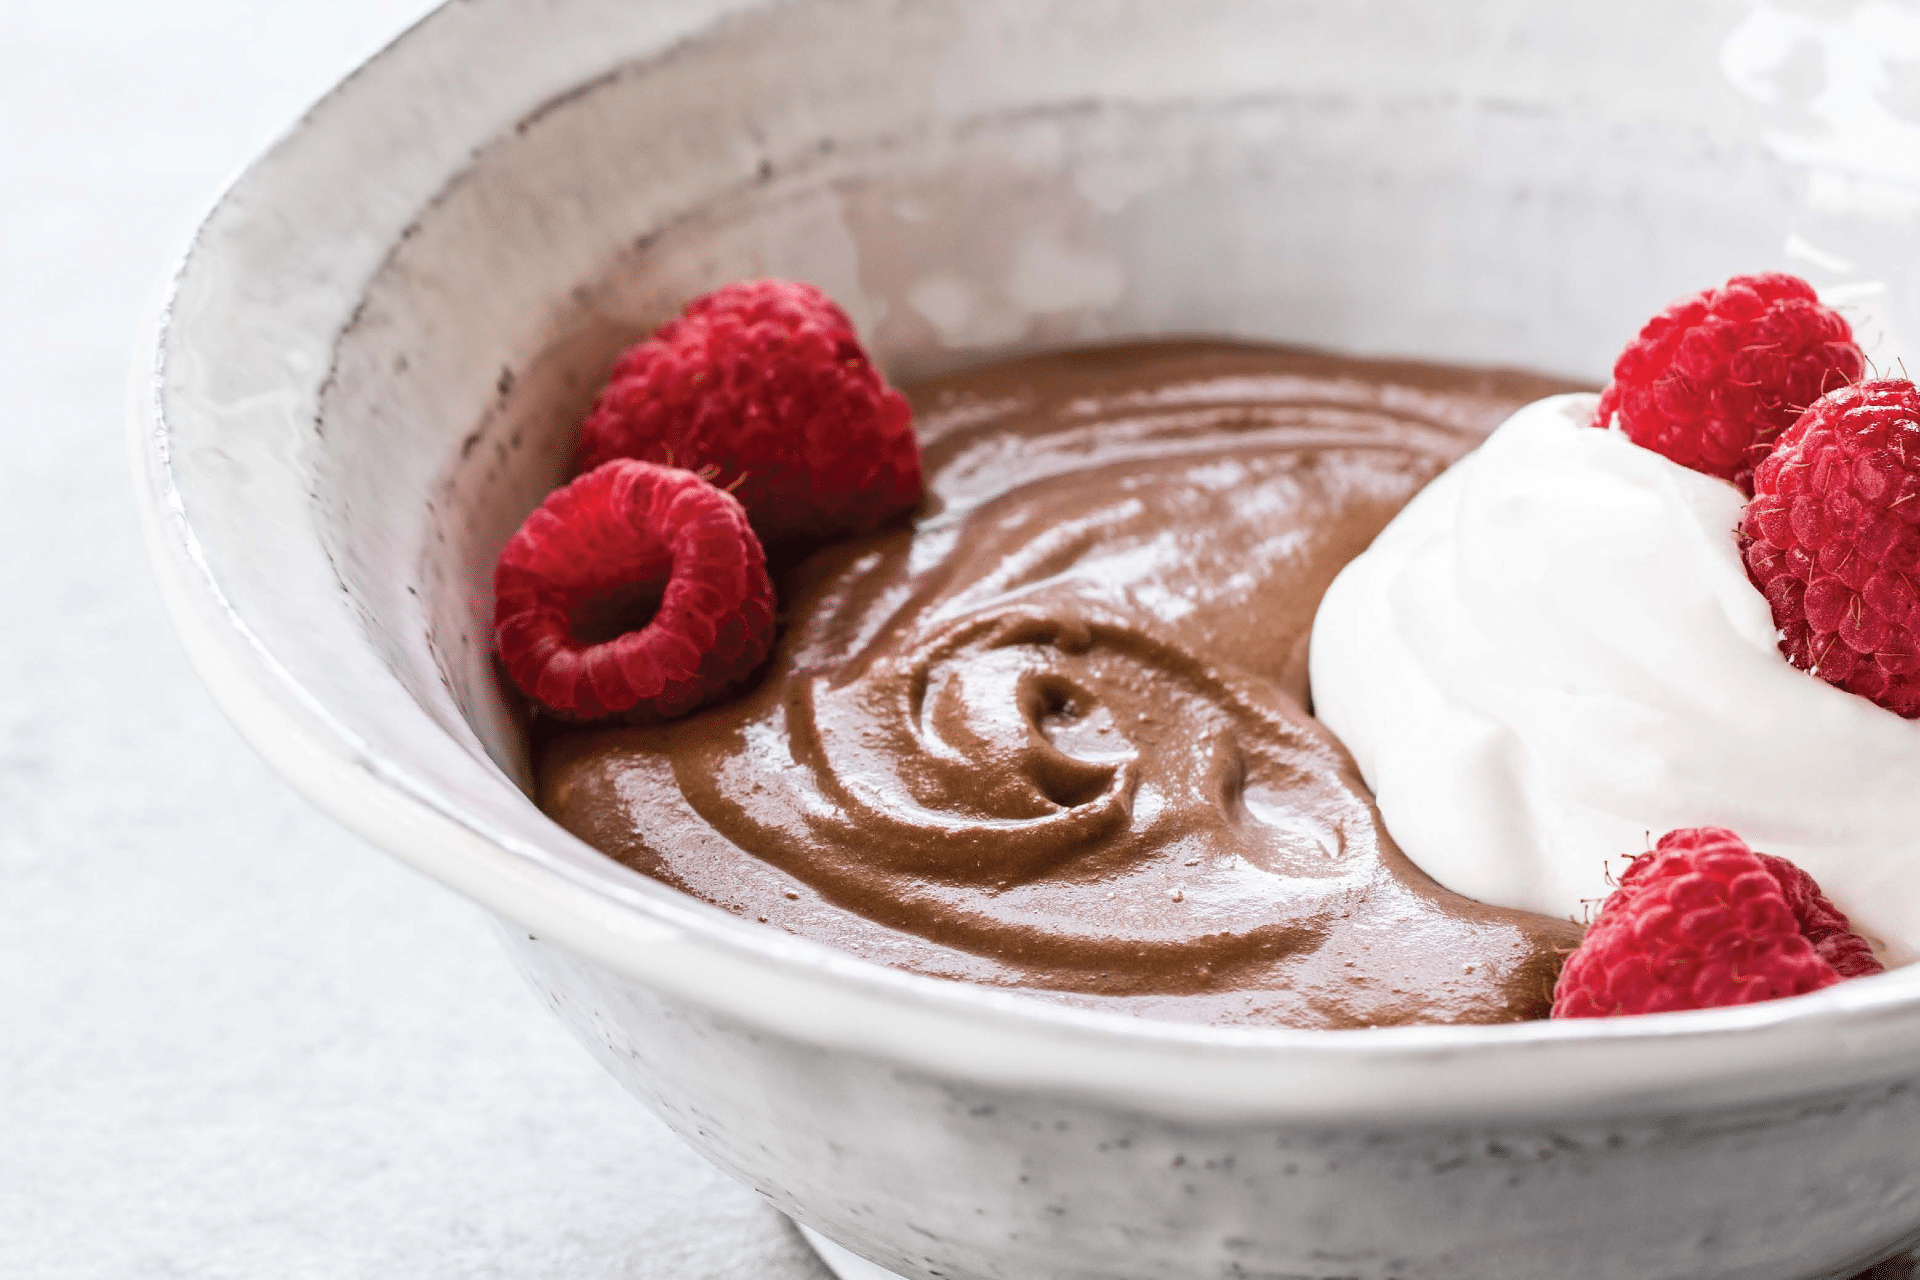 Bowl of chocolate pudding with whipped cream and raspberries